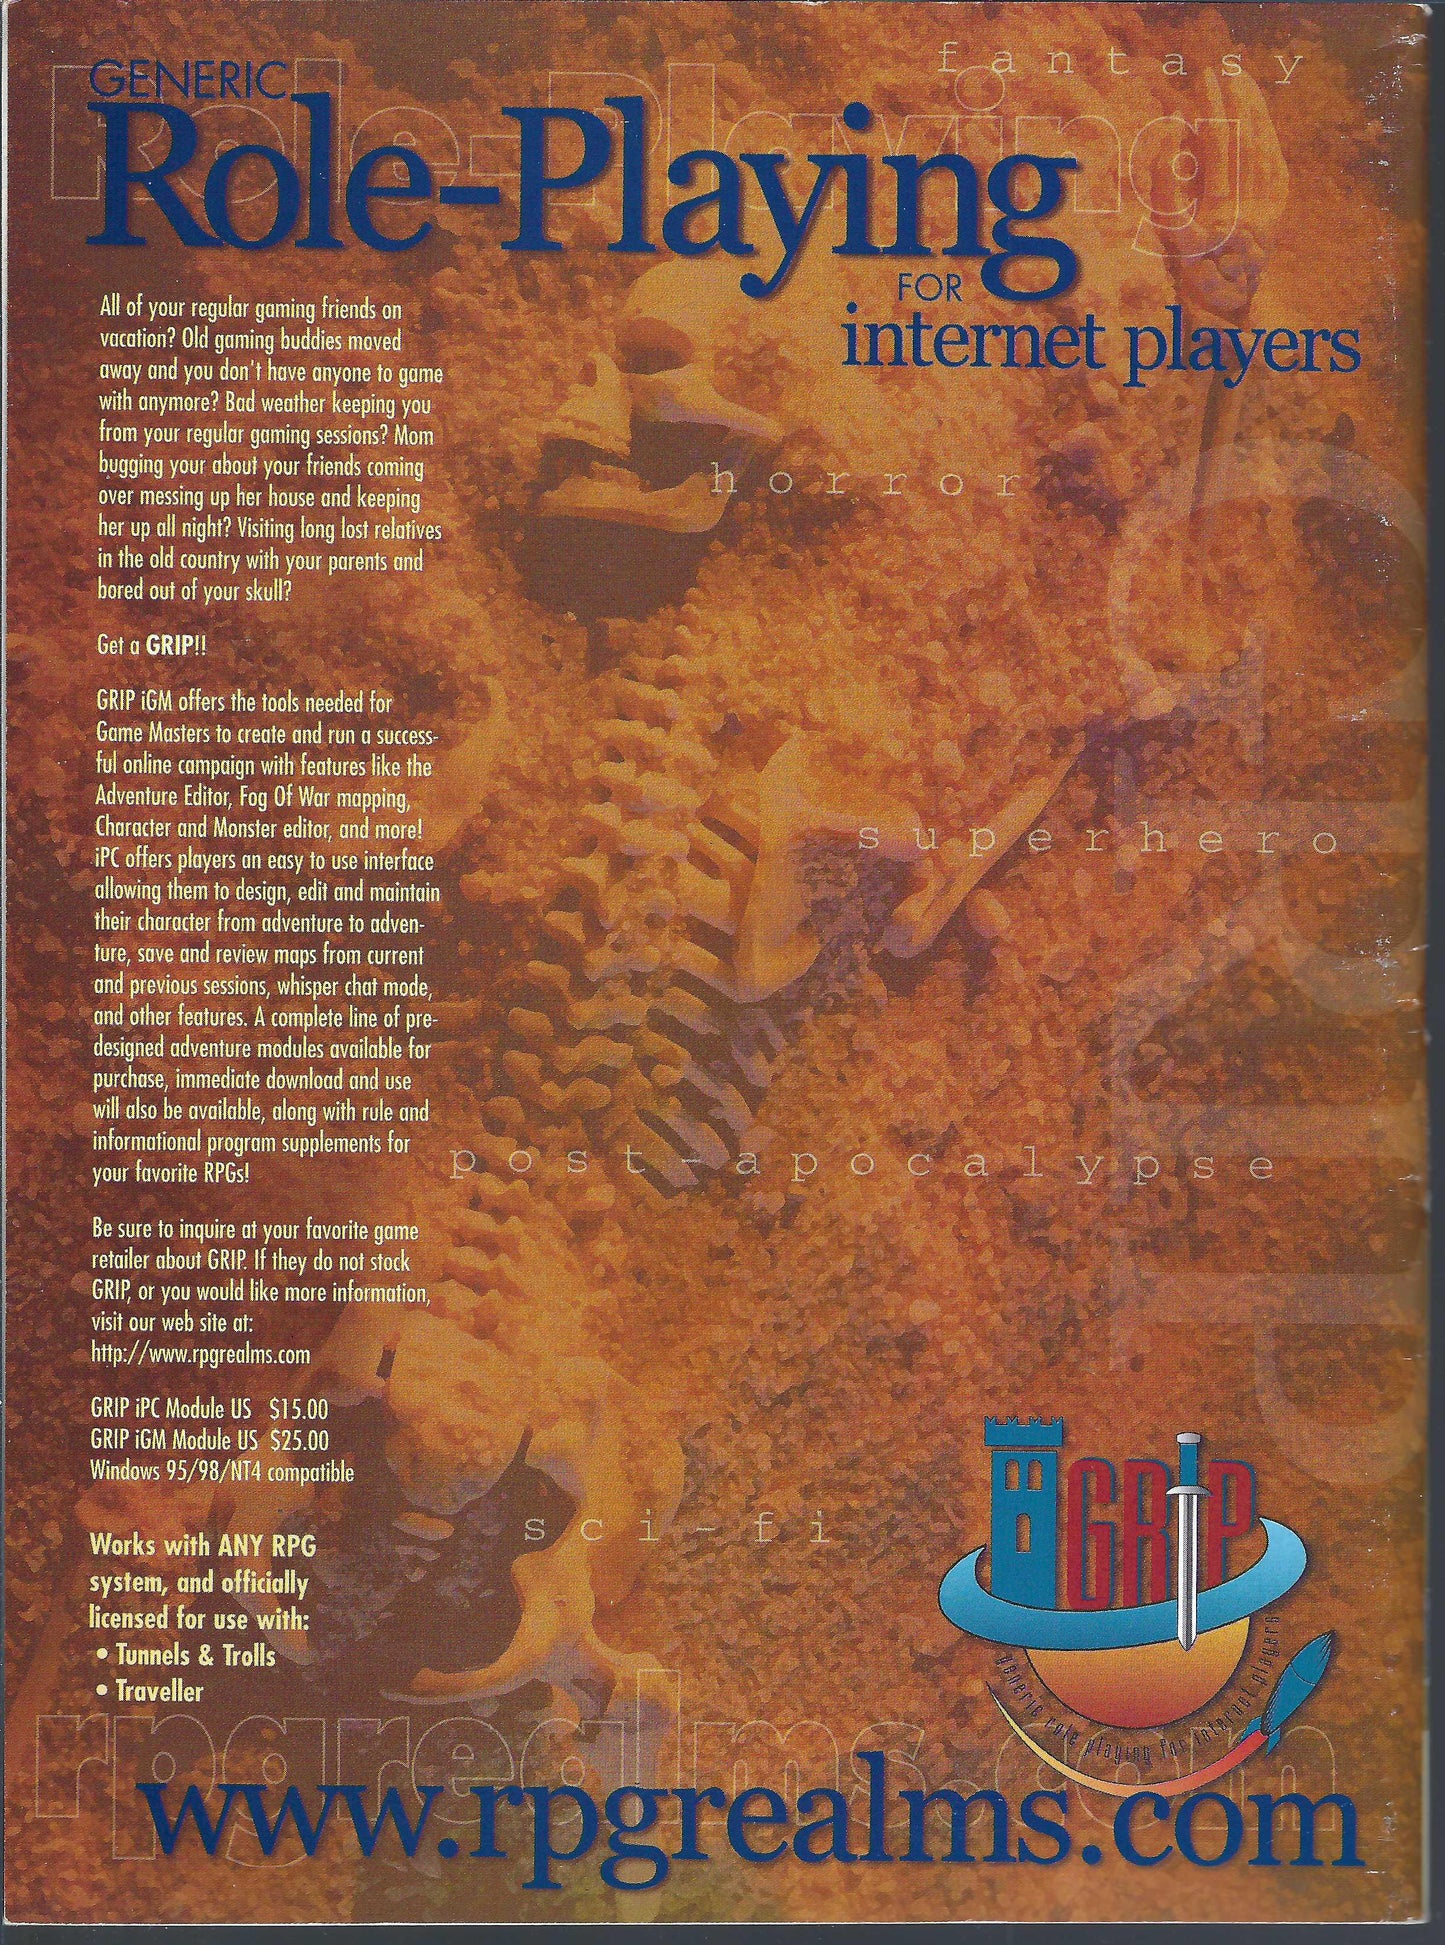 Dungeon Magazine issue 77 back cover